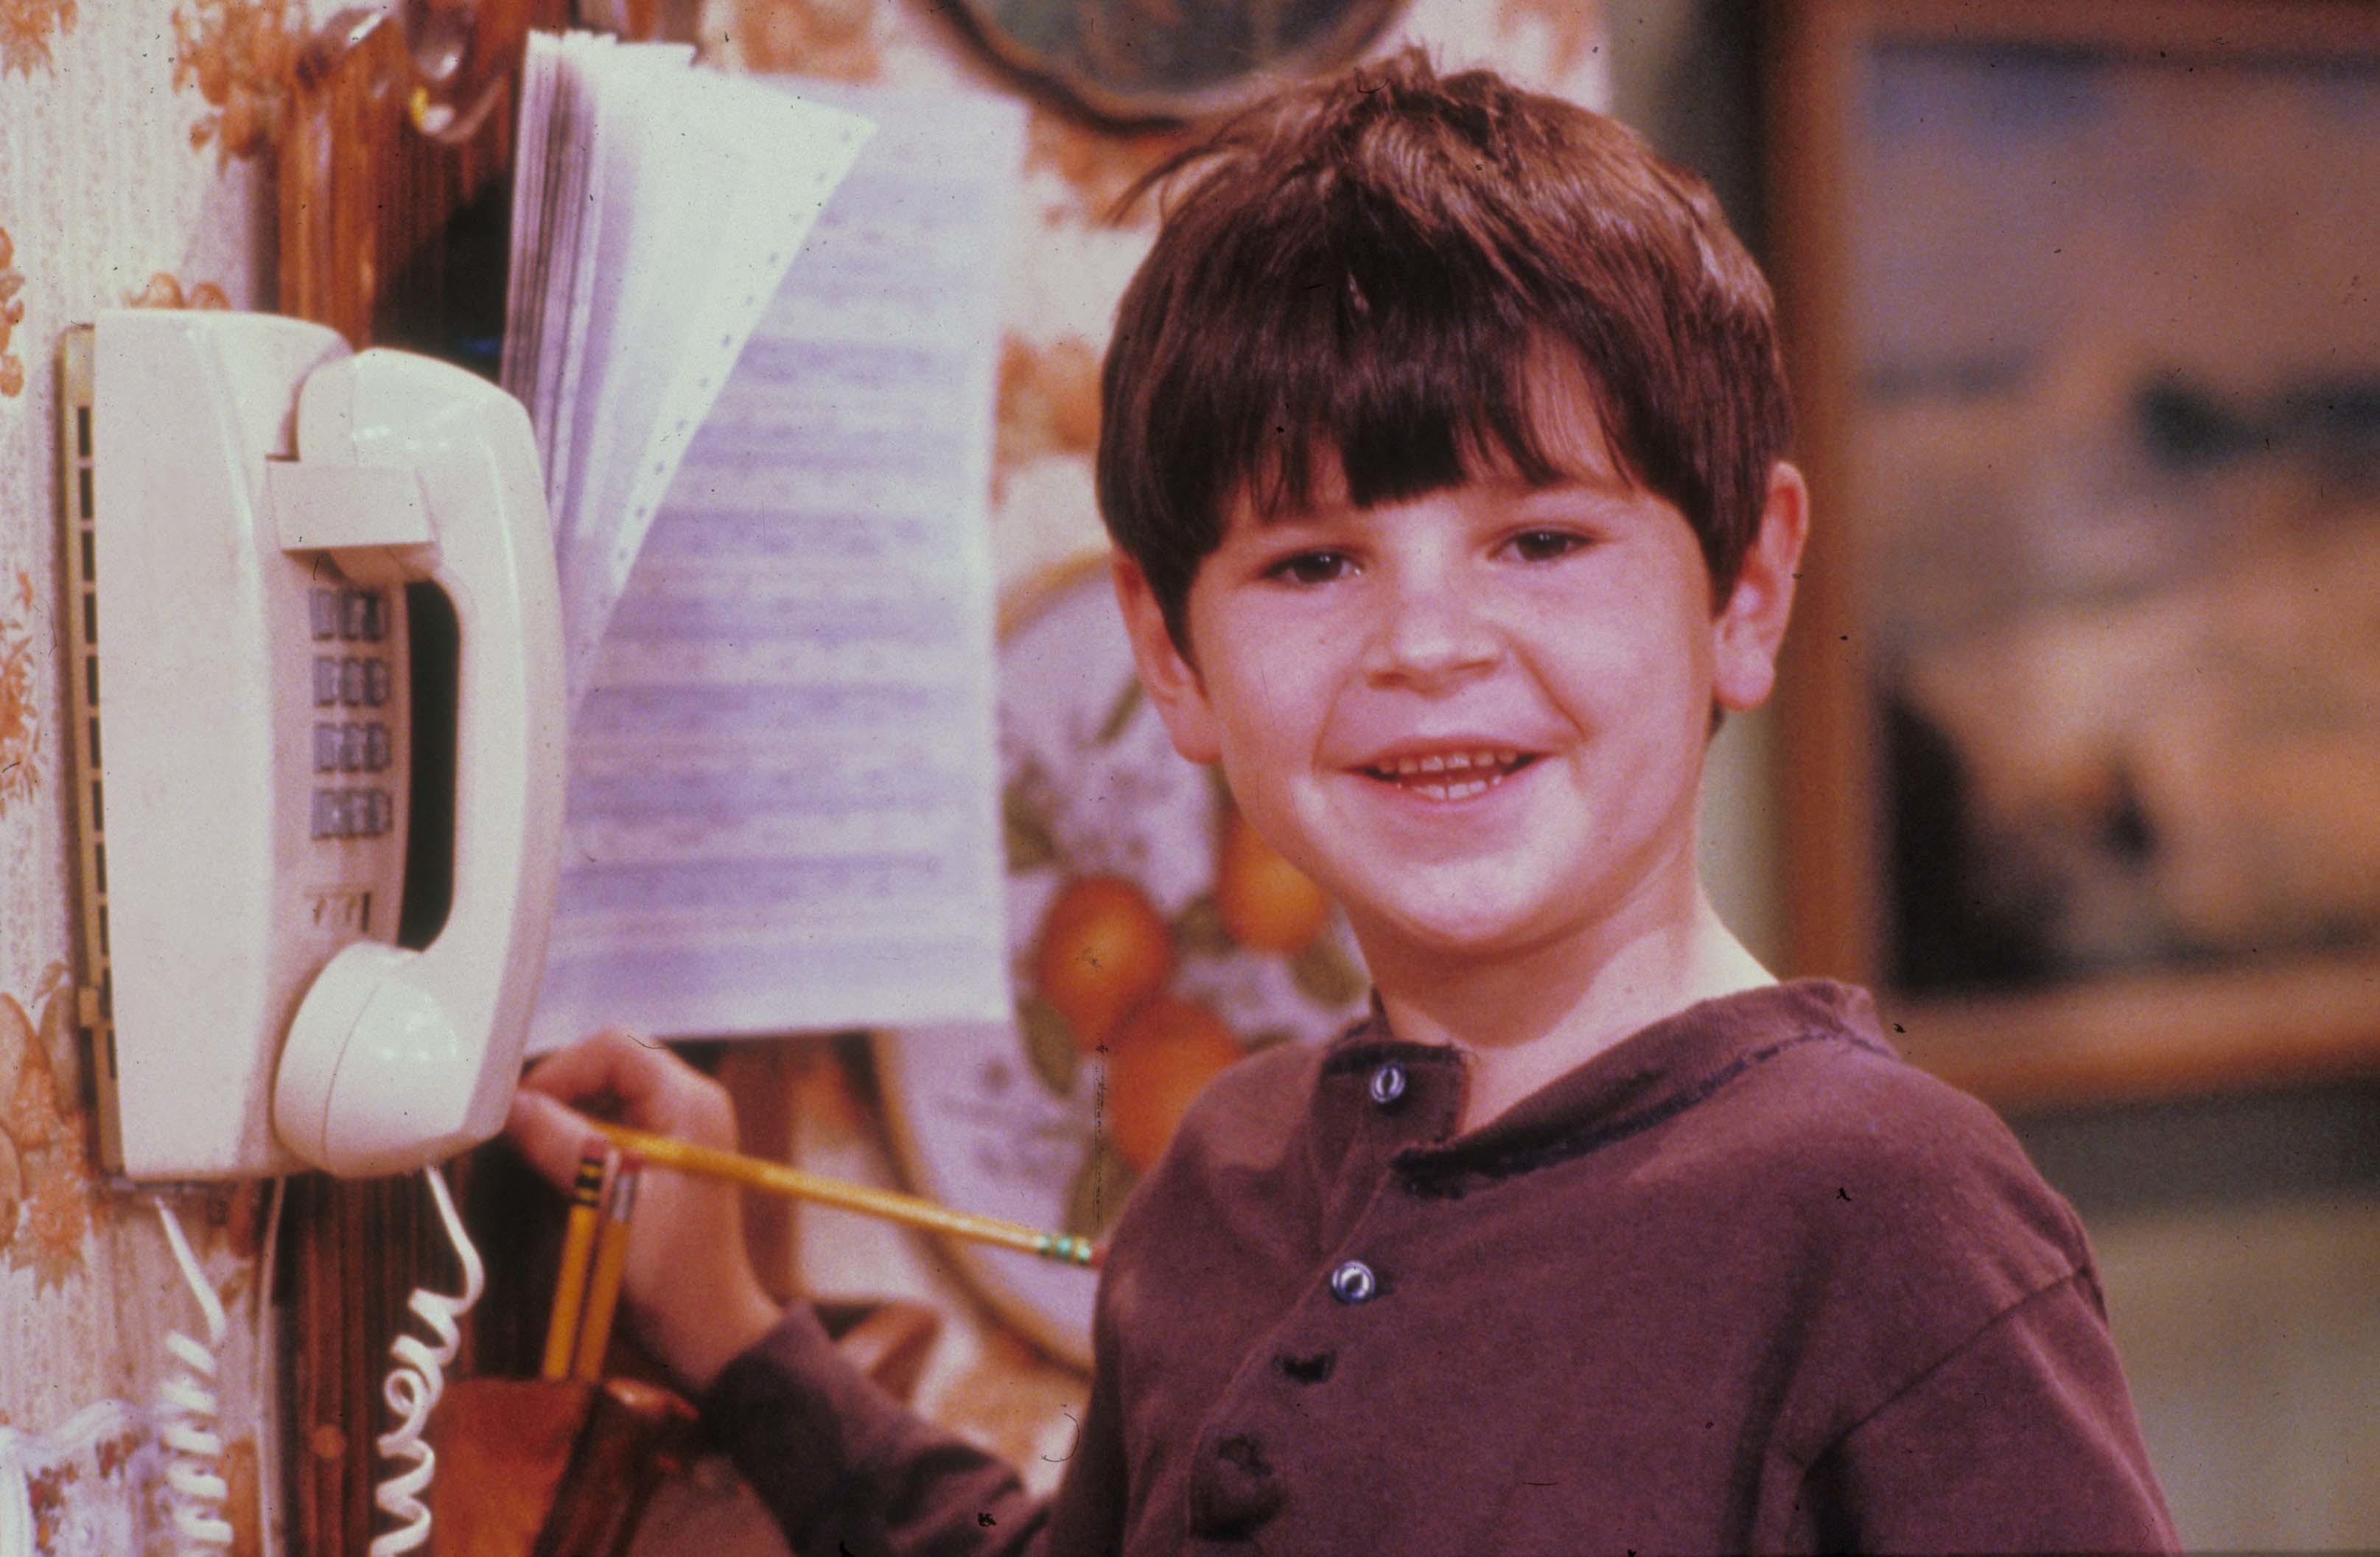 <p>A 6-year-old Michael Fishman made his acting debut playing Roseanne Barr's son on the sitcom "Roseanne" in 1988.</p>